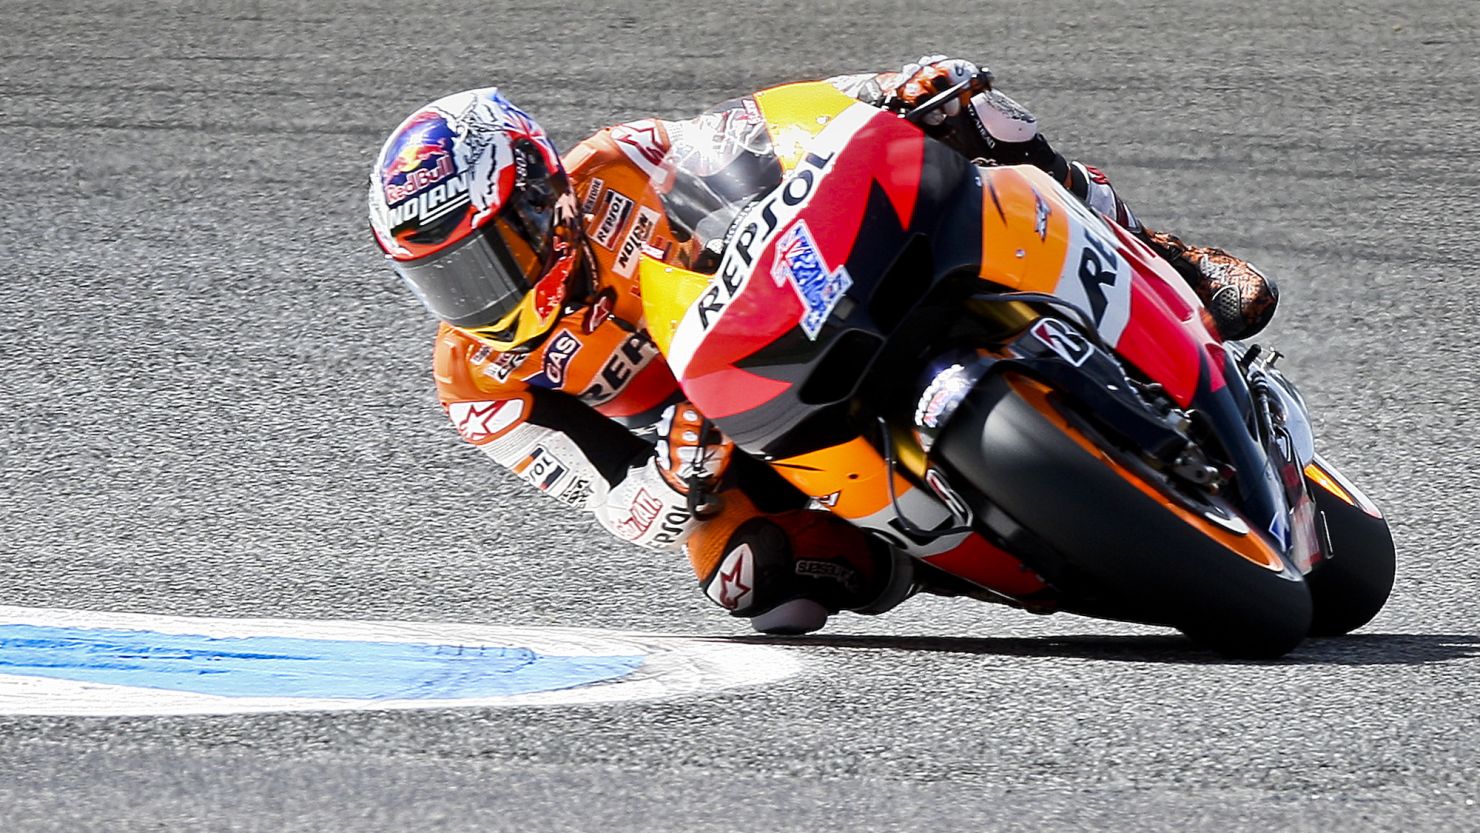 Australian motorcycle rider Casey Stoner is second in the MotoGP standings after two races this season.